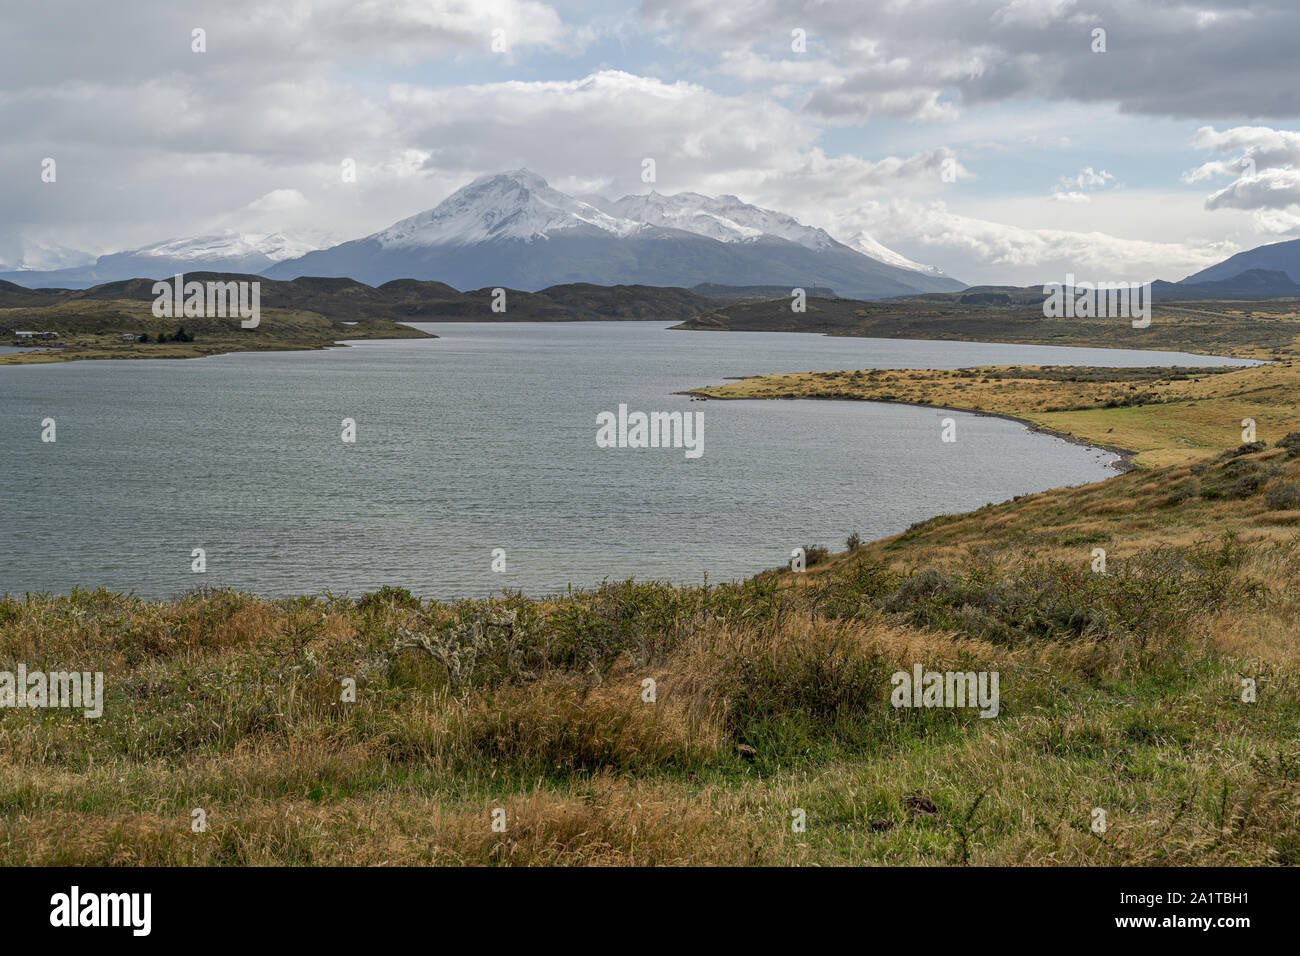 View of the Ultima Esperanza Sound with snowy mountain peak on the background, Puerto Natales, Chile Stock Photo